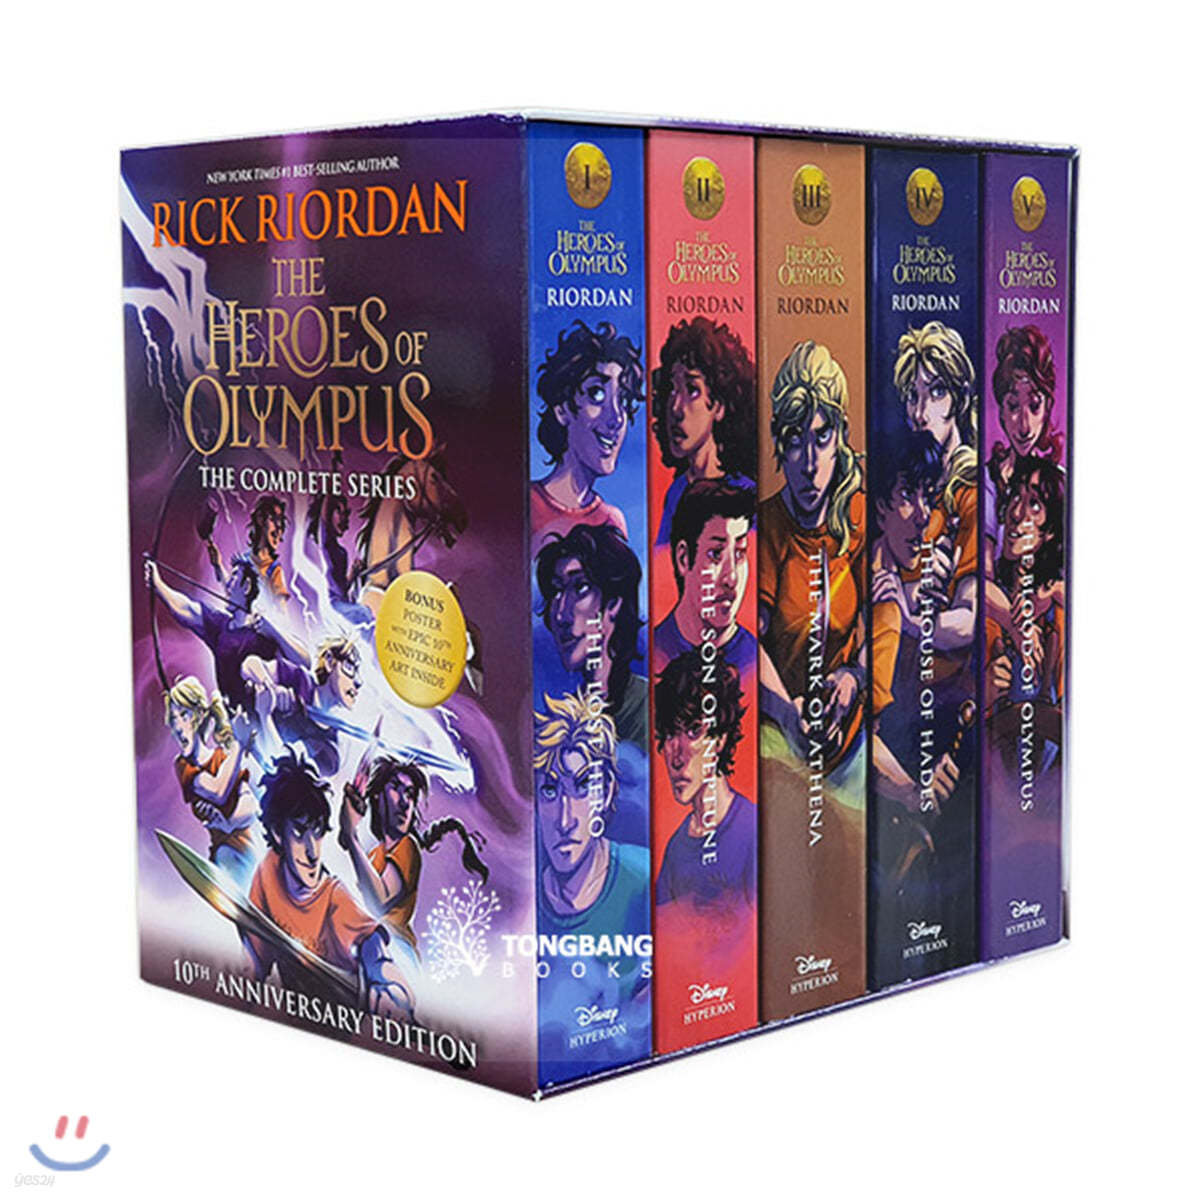 Heroes of Olympus Paperback Boxed Set, The-10th Anniversary Edition [With Poster]